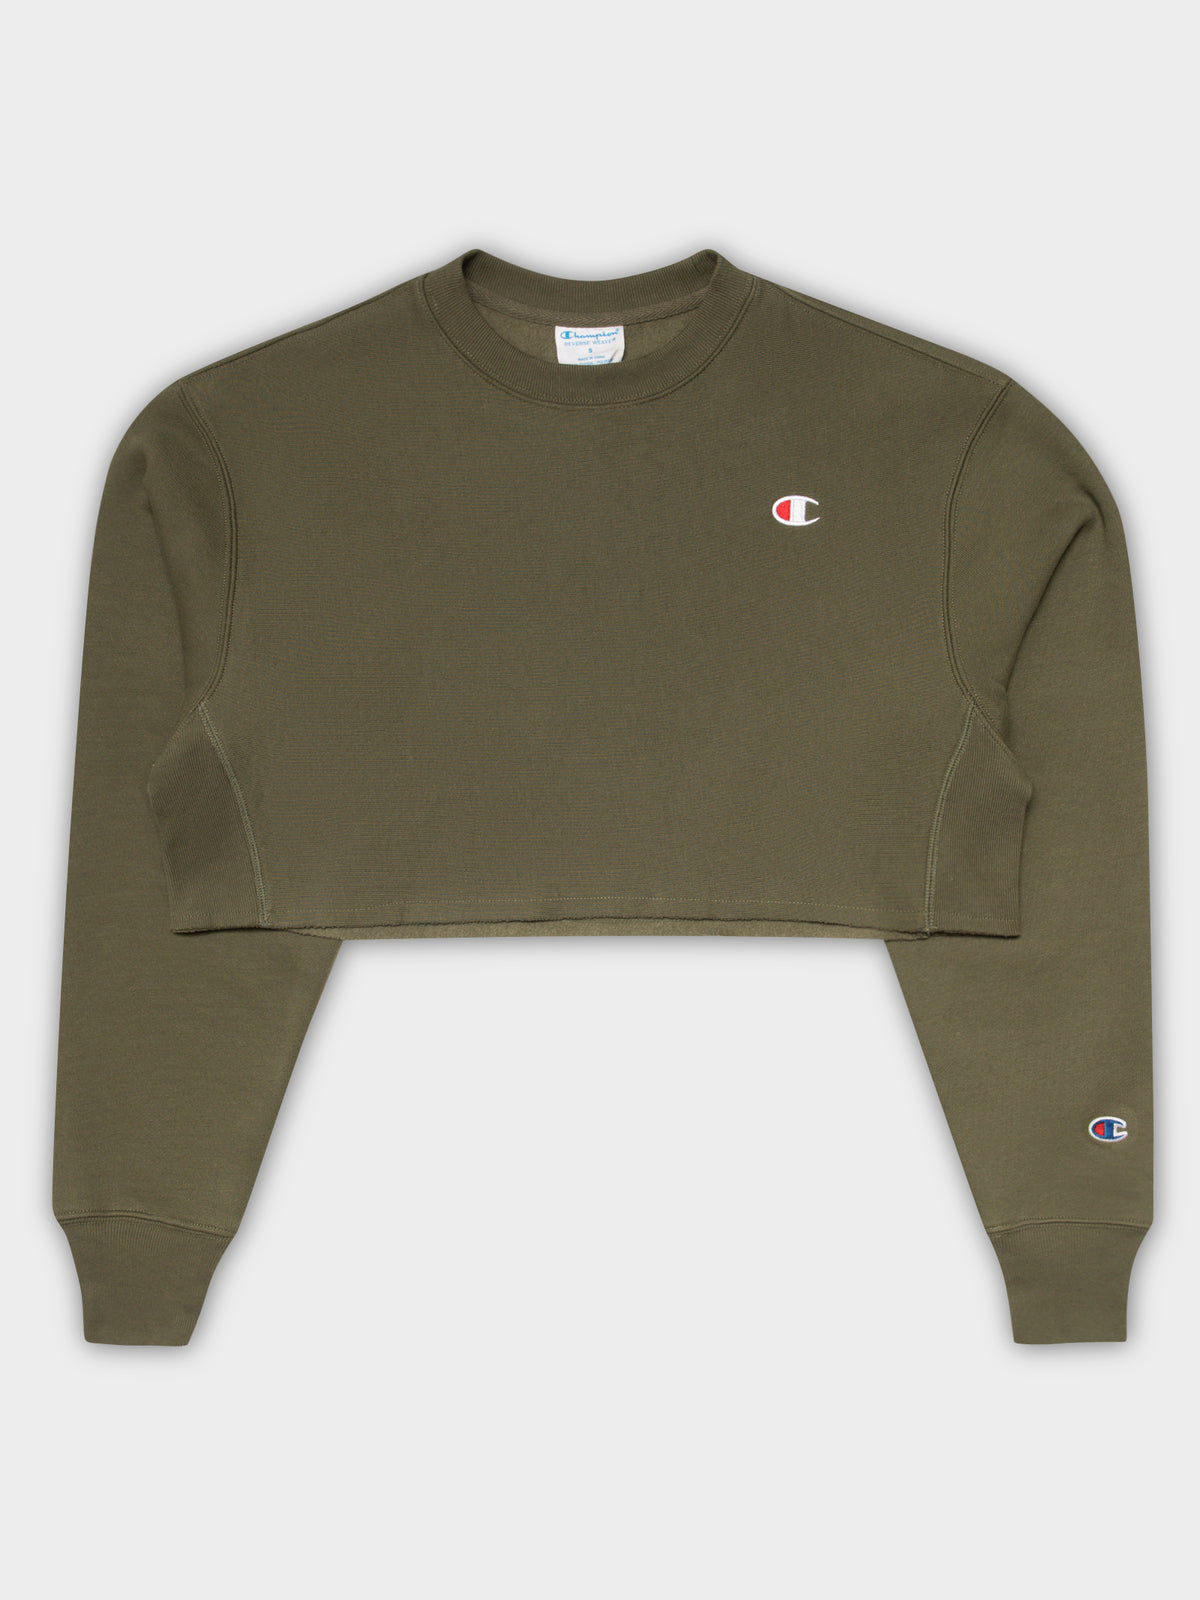 Reverse Weave Small C Cropped Sweater in Cargo Olive